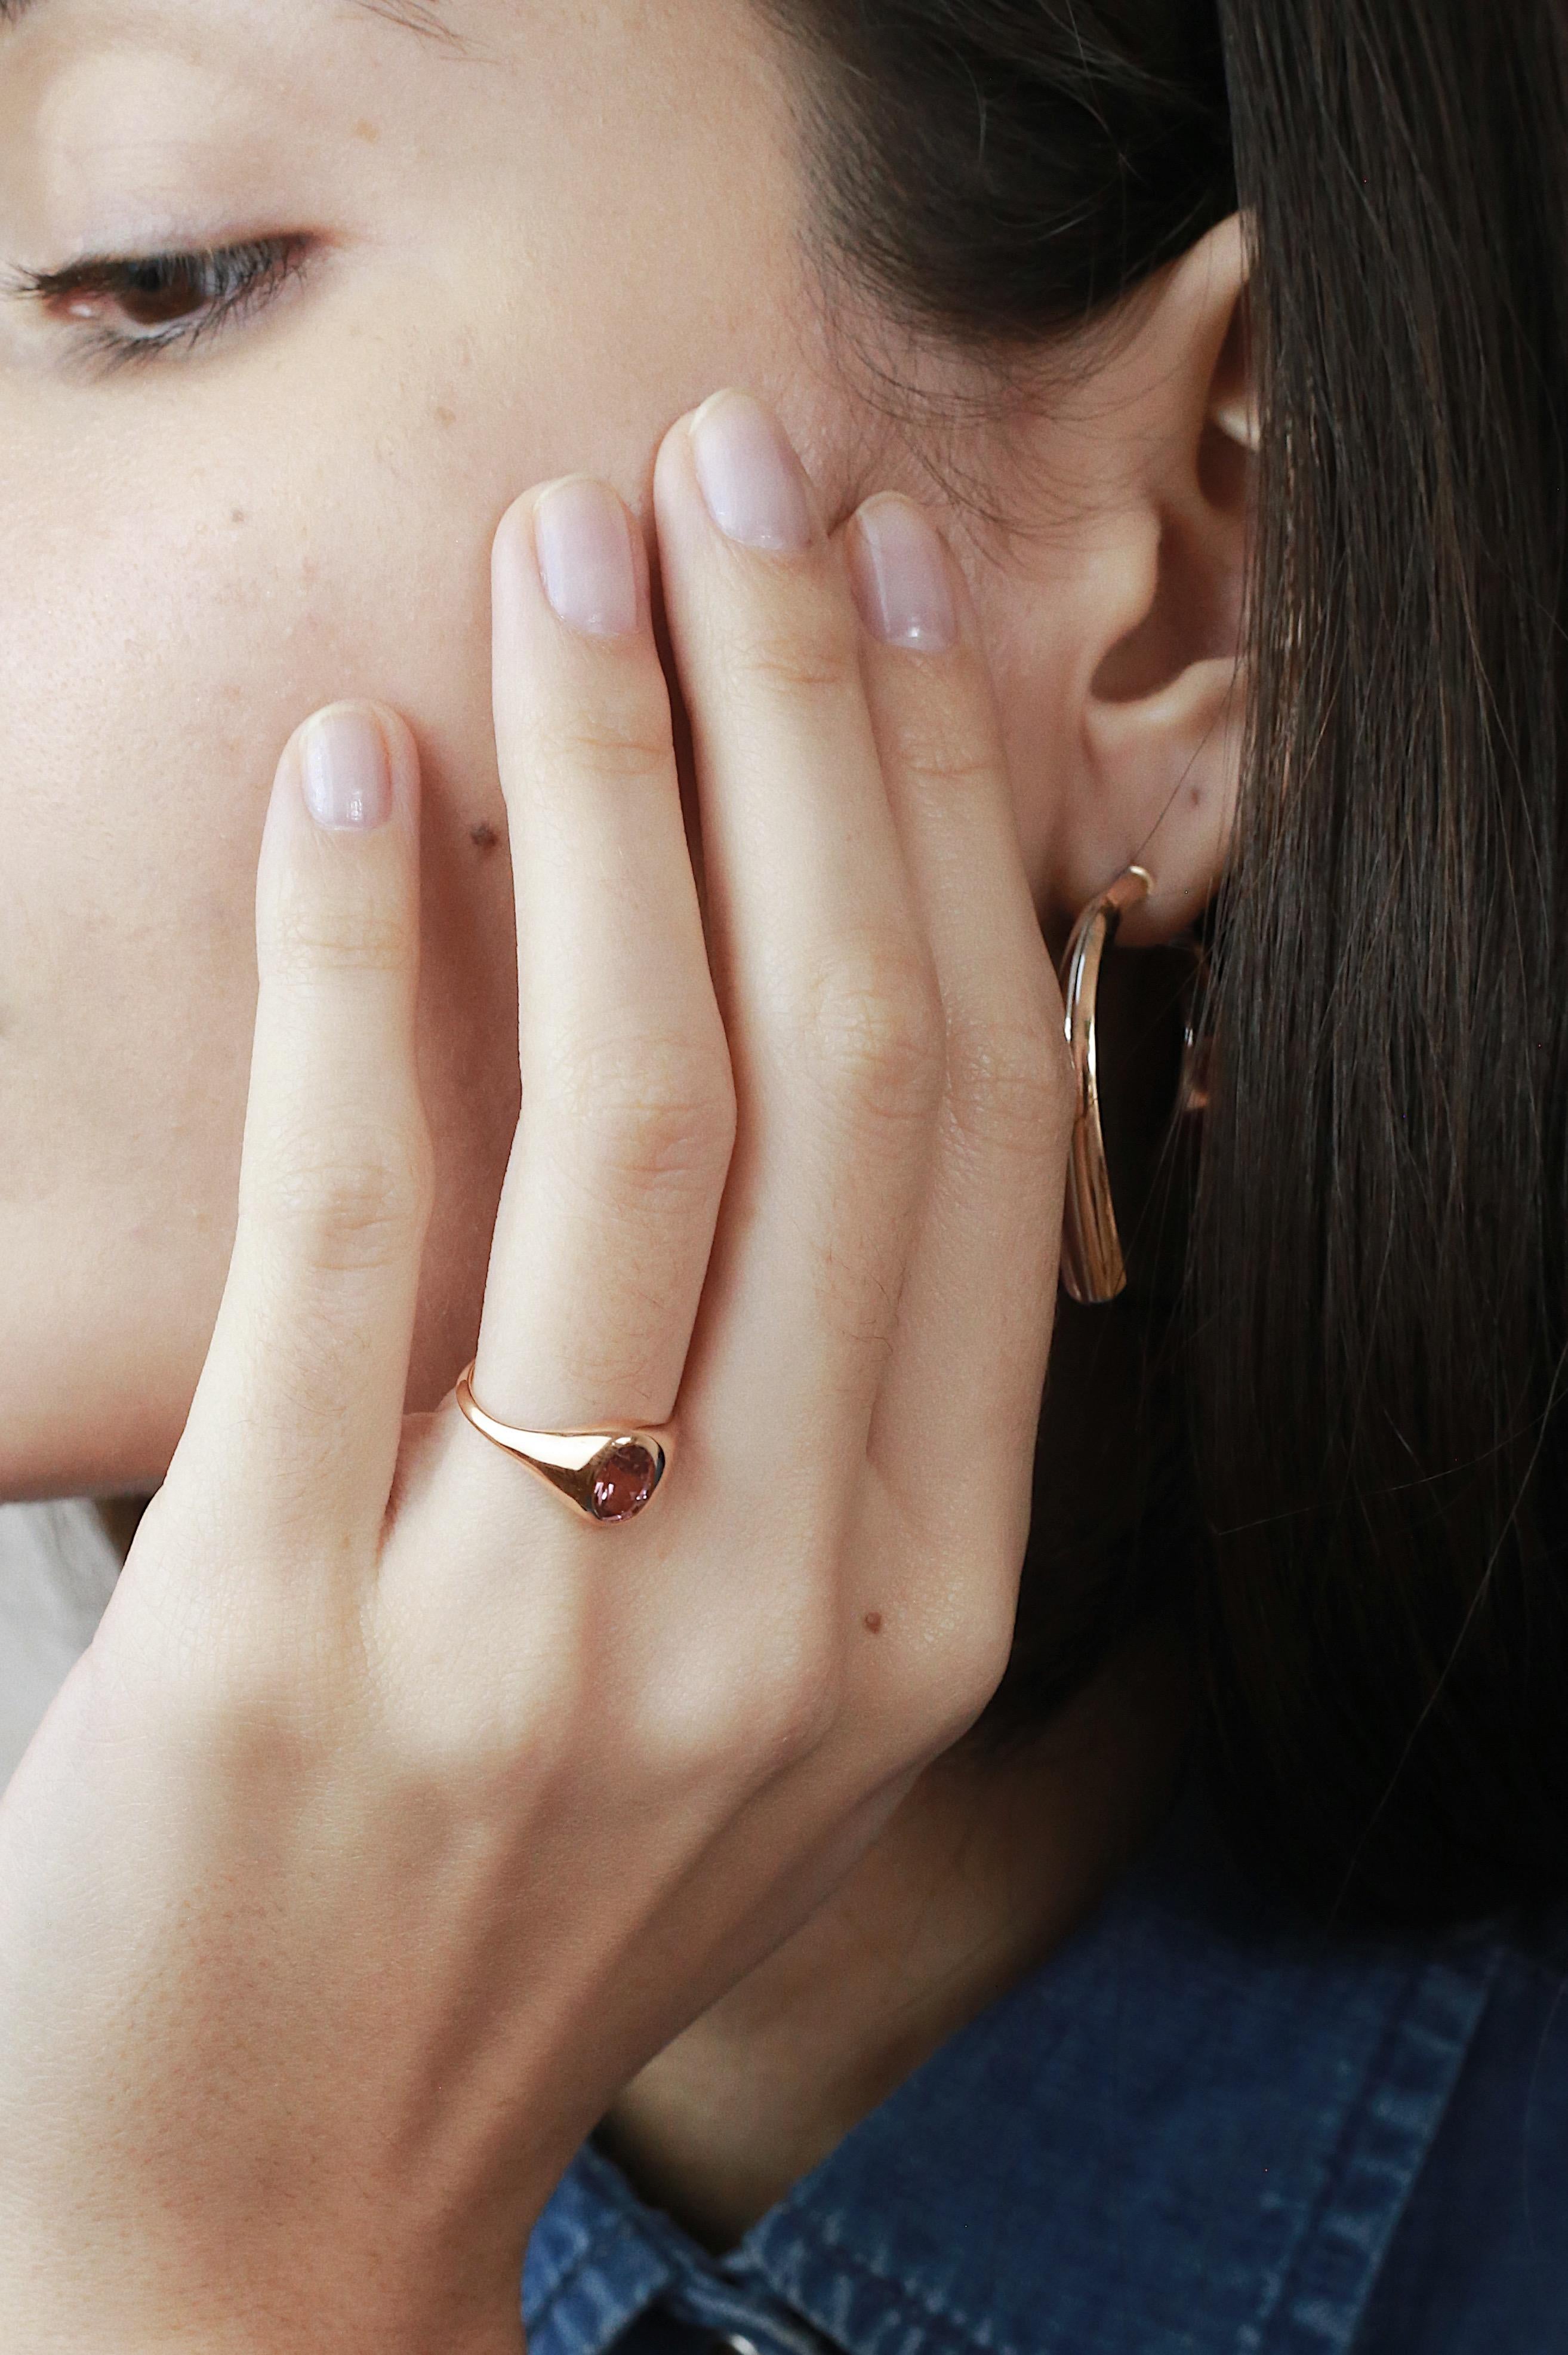 The signature ring is an everyday subtle and elegant piece.

Saudade is a word that exists only in Portuguese. It describes a deep emotional state, when you are missing someone or something, a yearning for happiness that has passed, or perhaps never